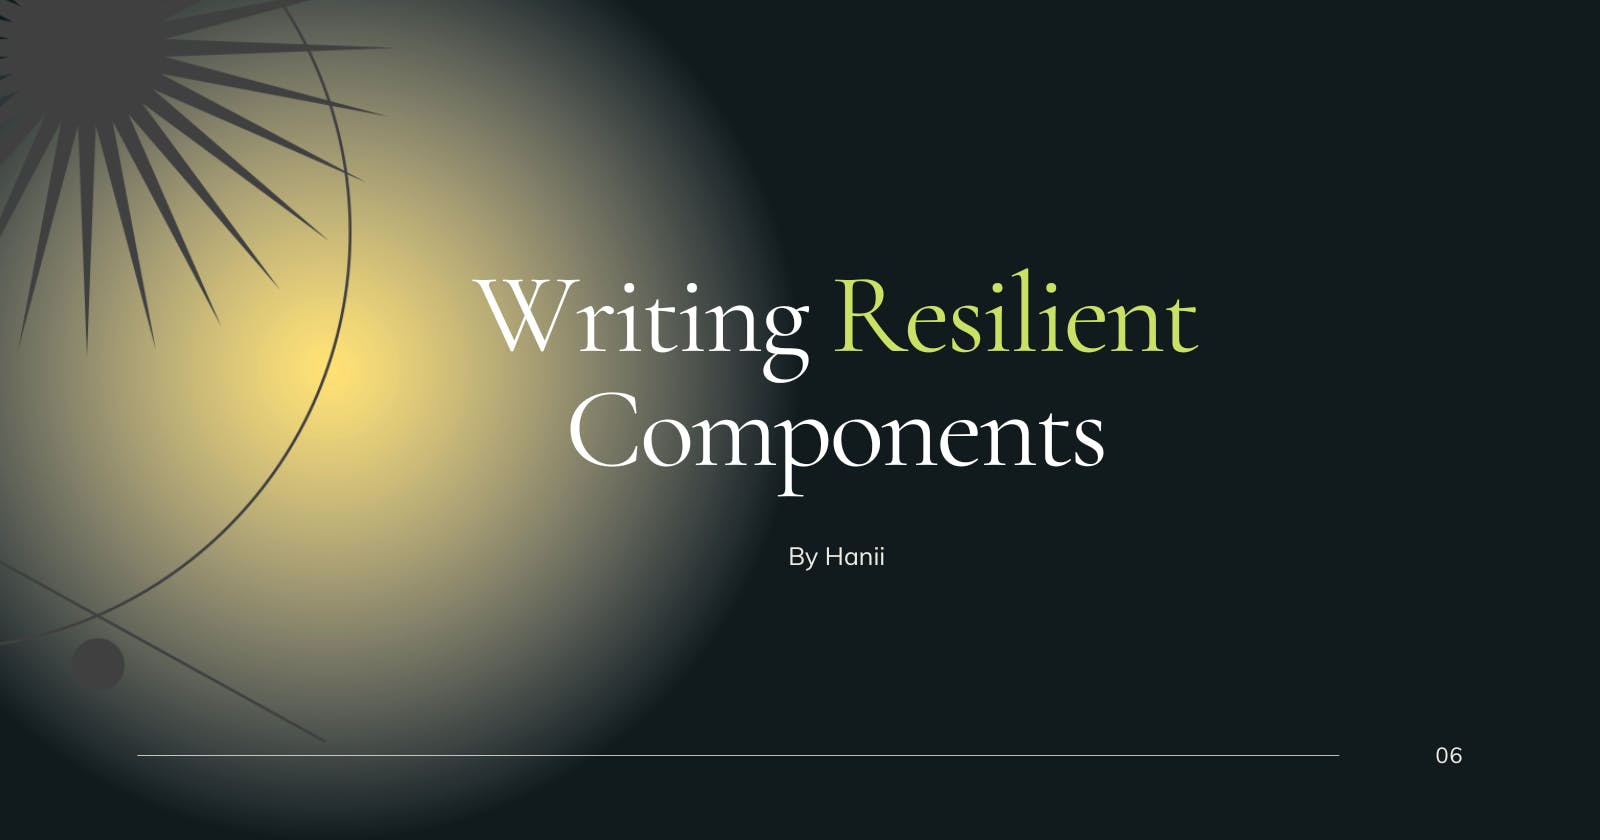 Writing Resilient Components